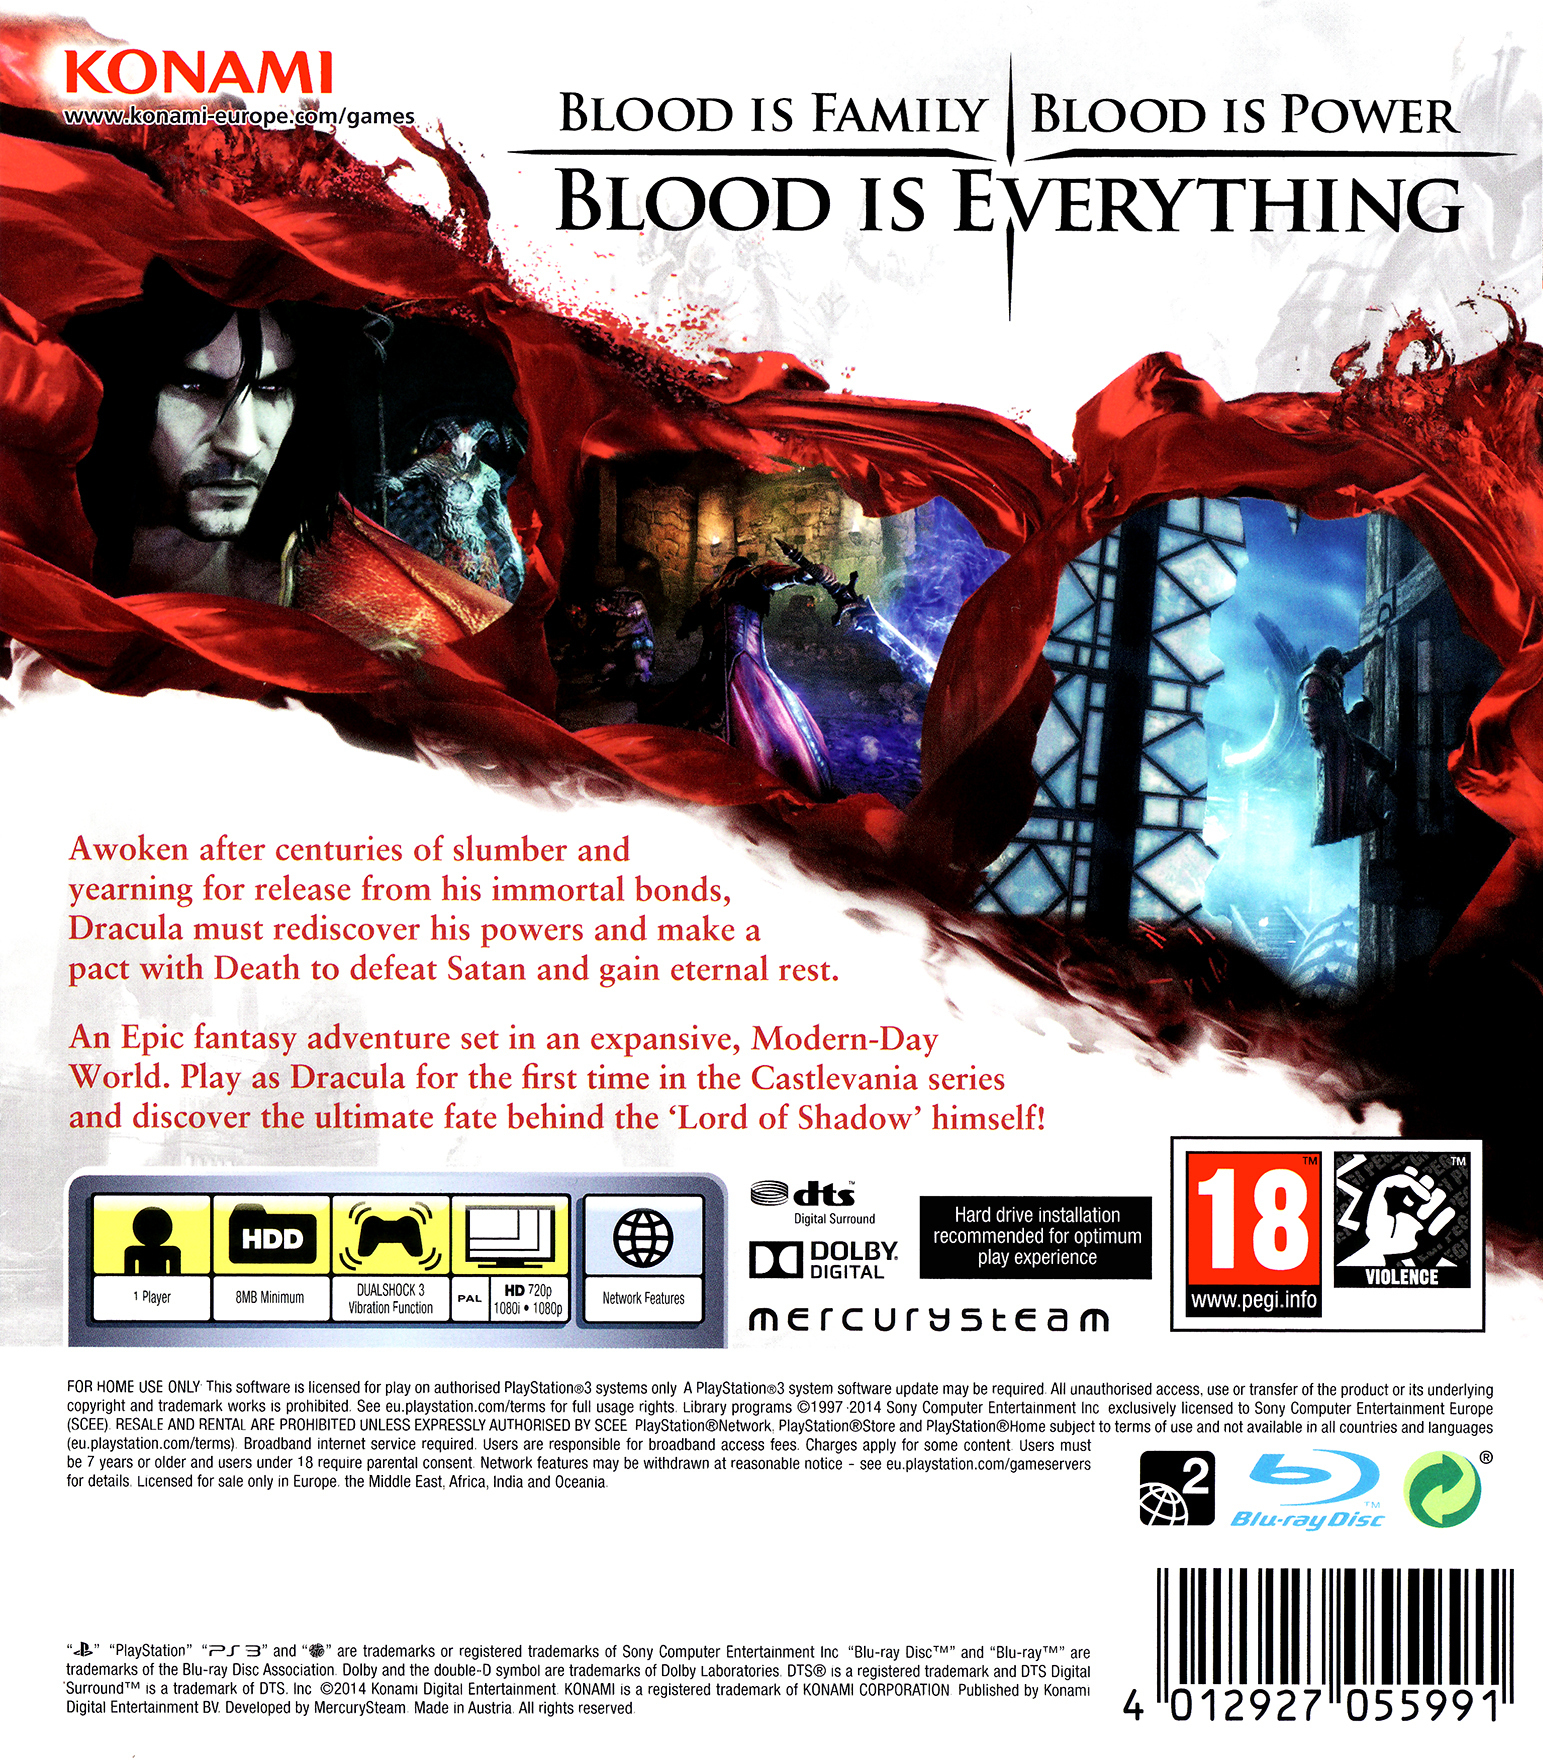 Castlevania: Lords of Shadow 2 Box Shot for PlayStation 3 - GameFAQs